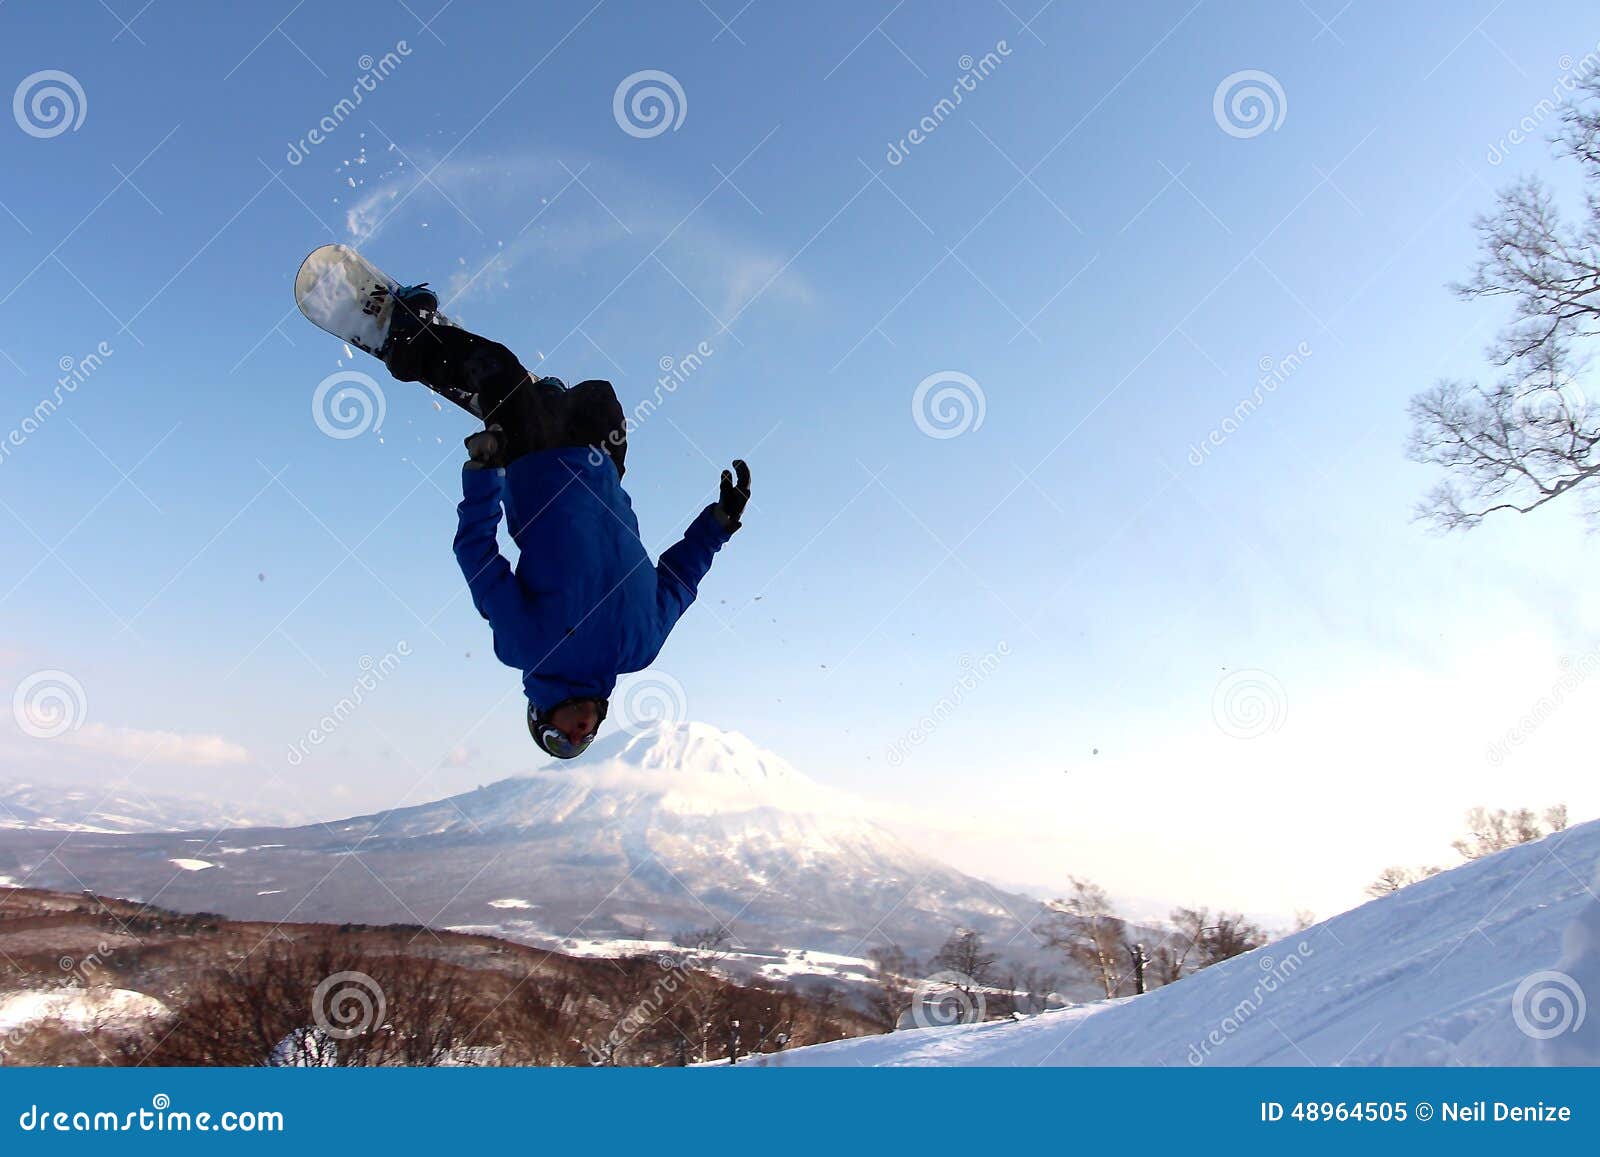 snowboarder sending it off backcountry jump